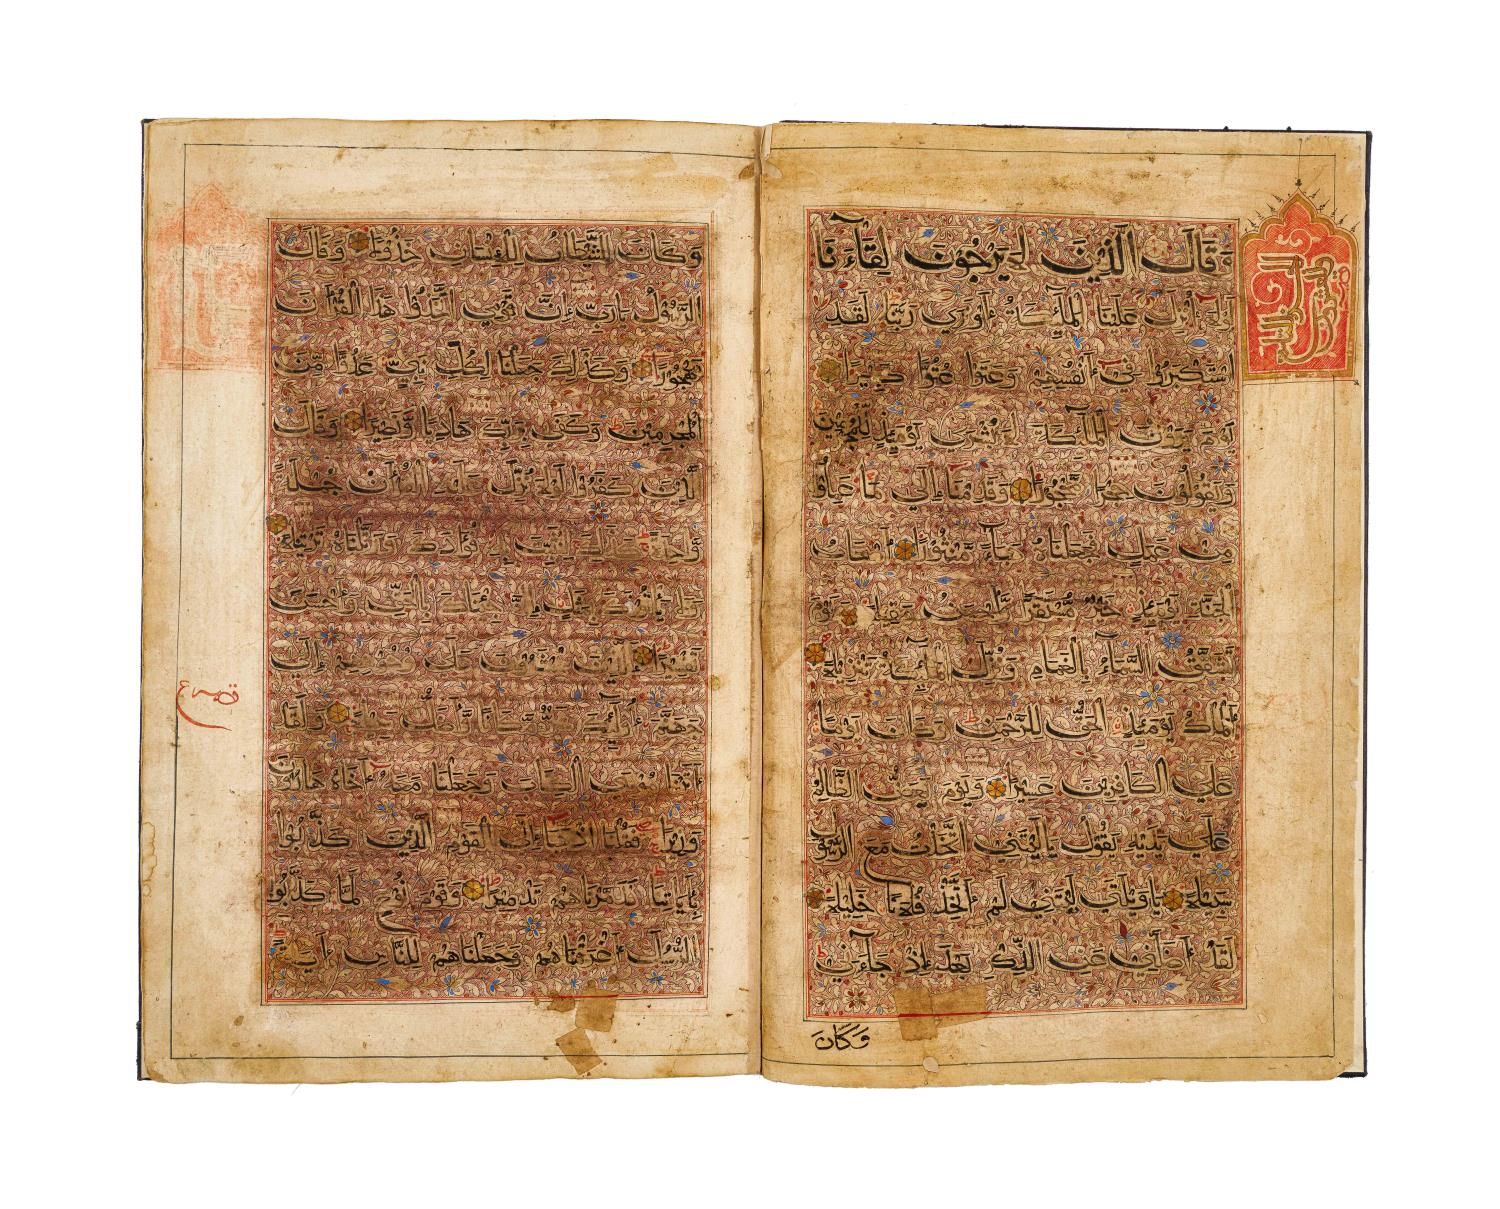 AN ILLUMINATED SECTION FROM A MONUMENTAL BIHARI QUR'AN SULTANATE INDIA, 15TH CEN&hellip;